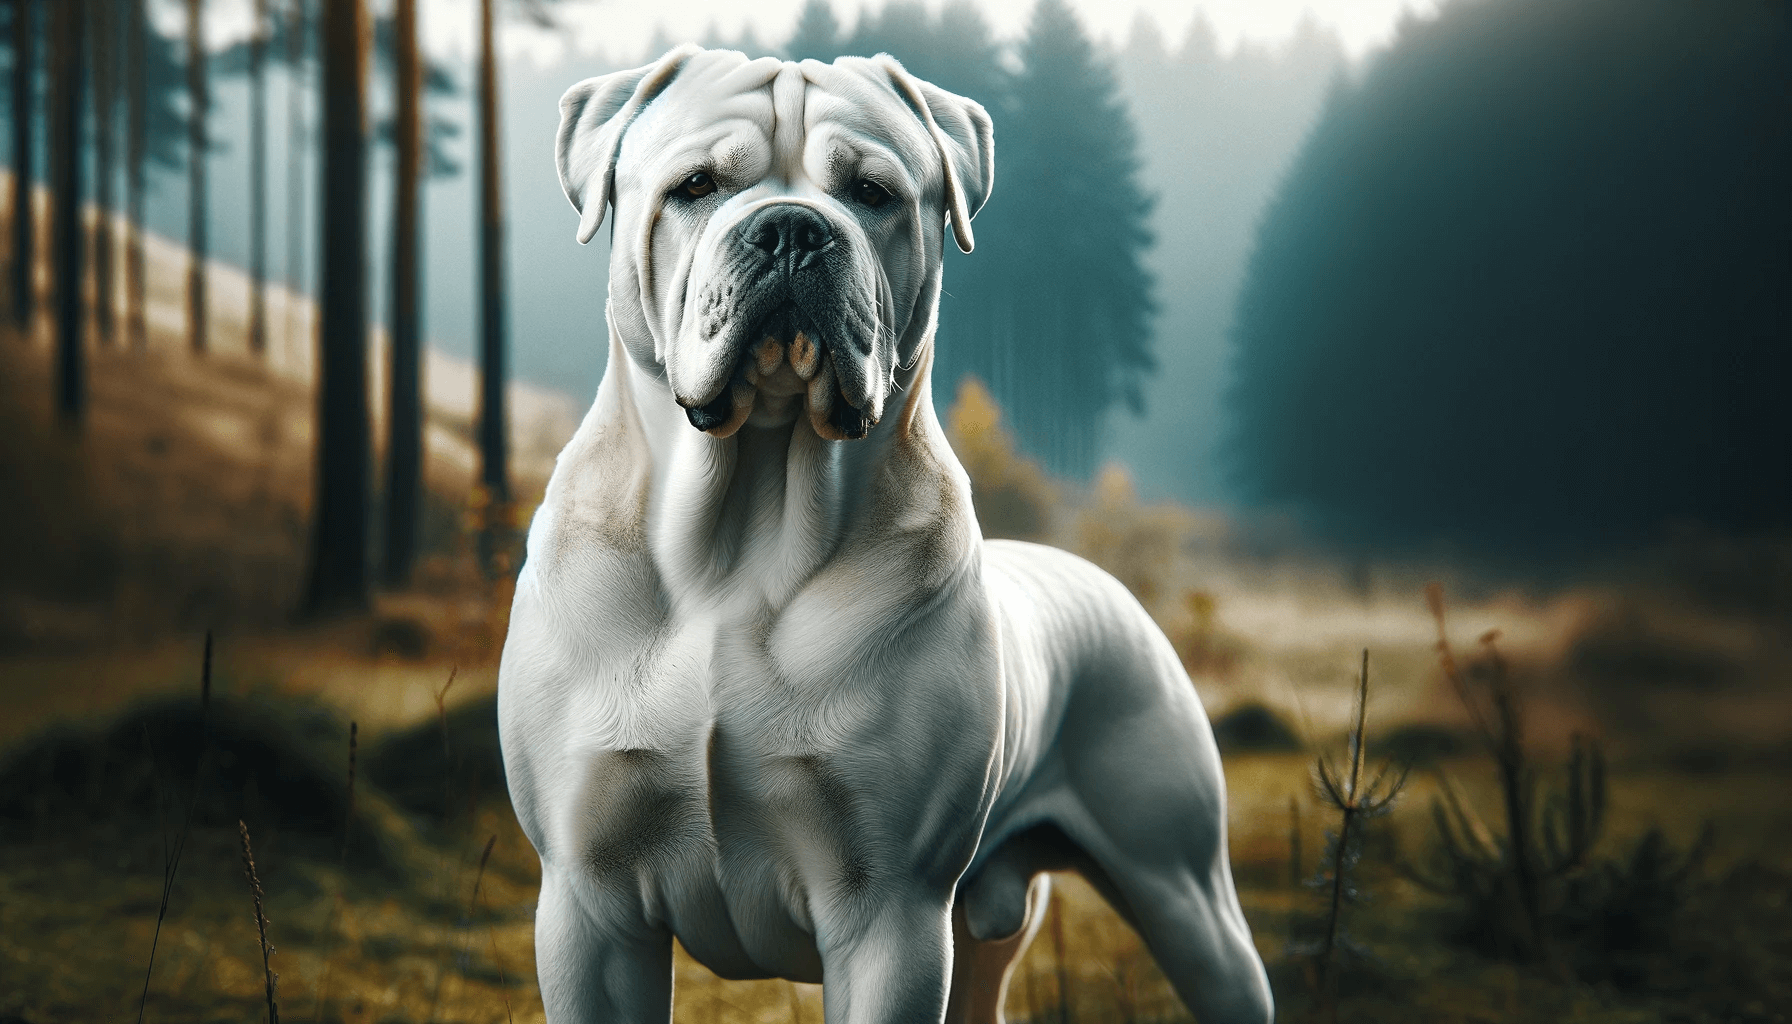 A proud White Cane Corso in a natural outdoor environment, standing with a proud posture.